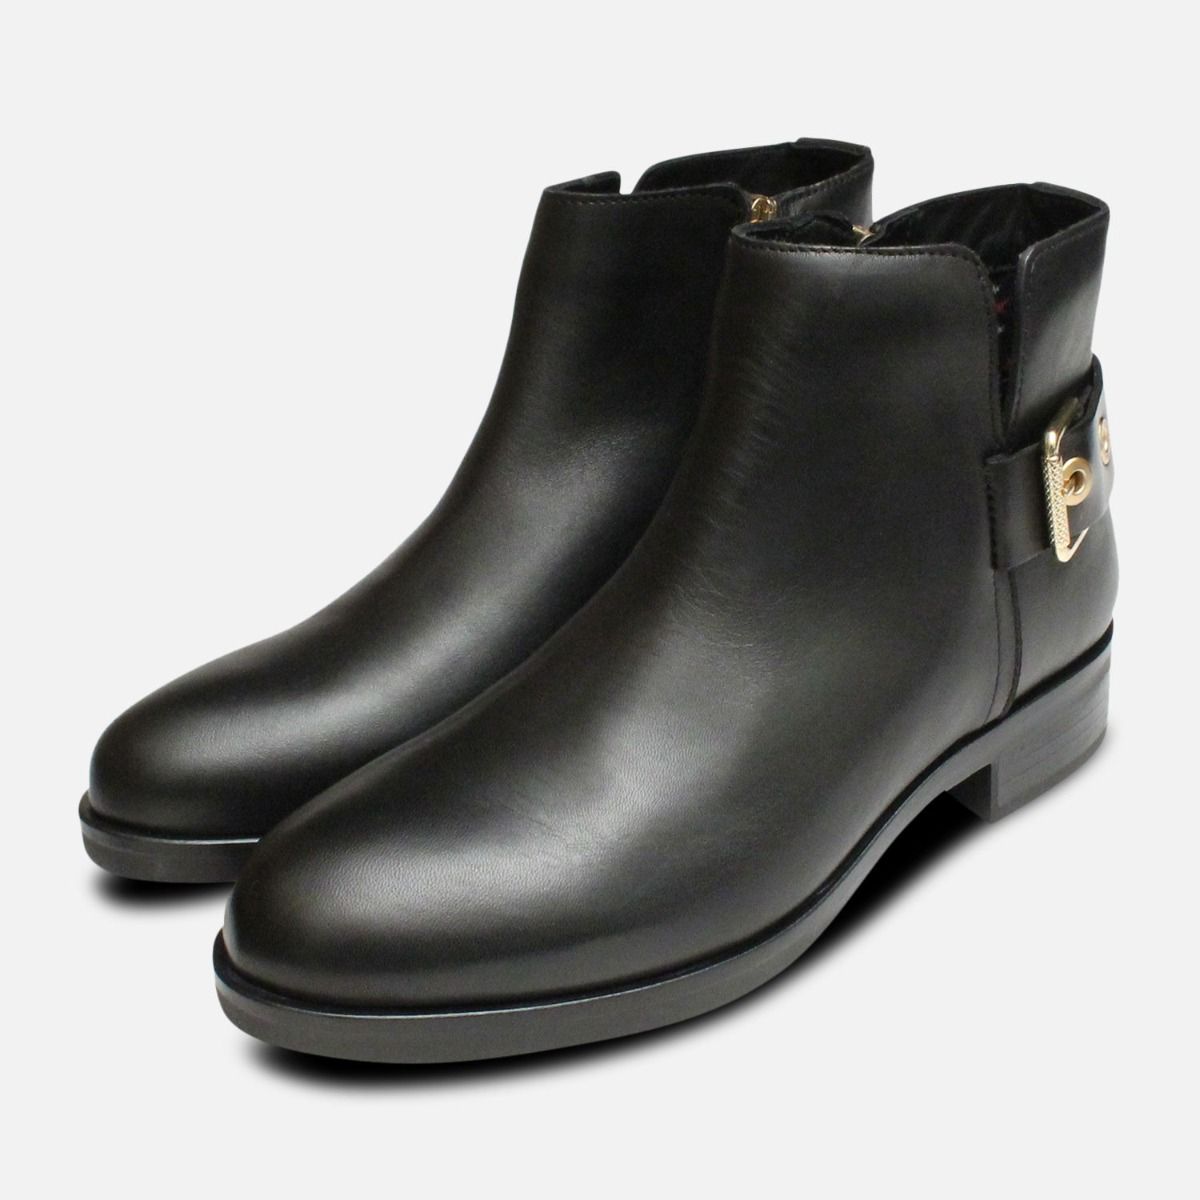 Tessa Gold Buckle Ankle Boots in Black 